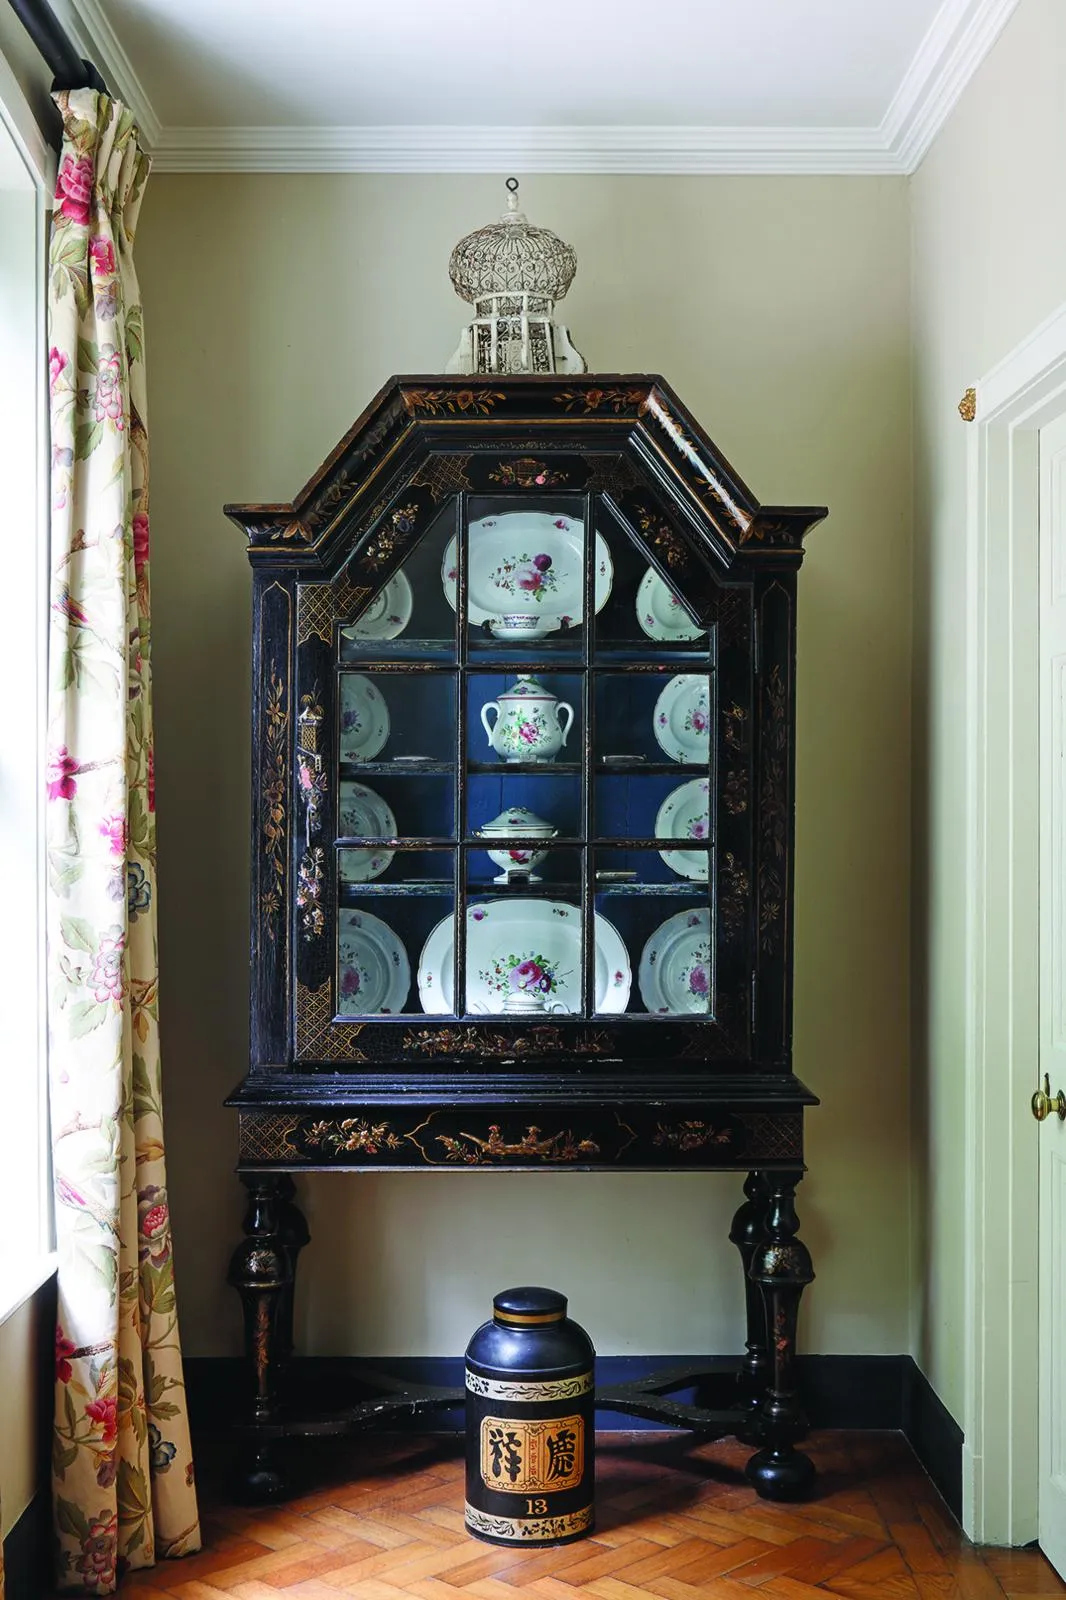 Regency-style home chinoiserie cabinet